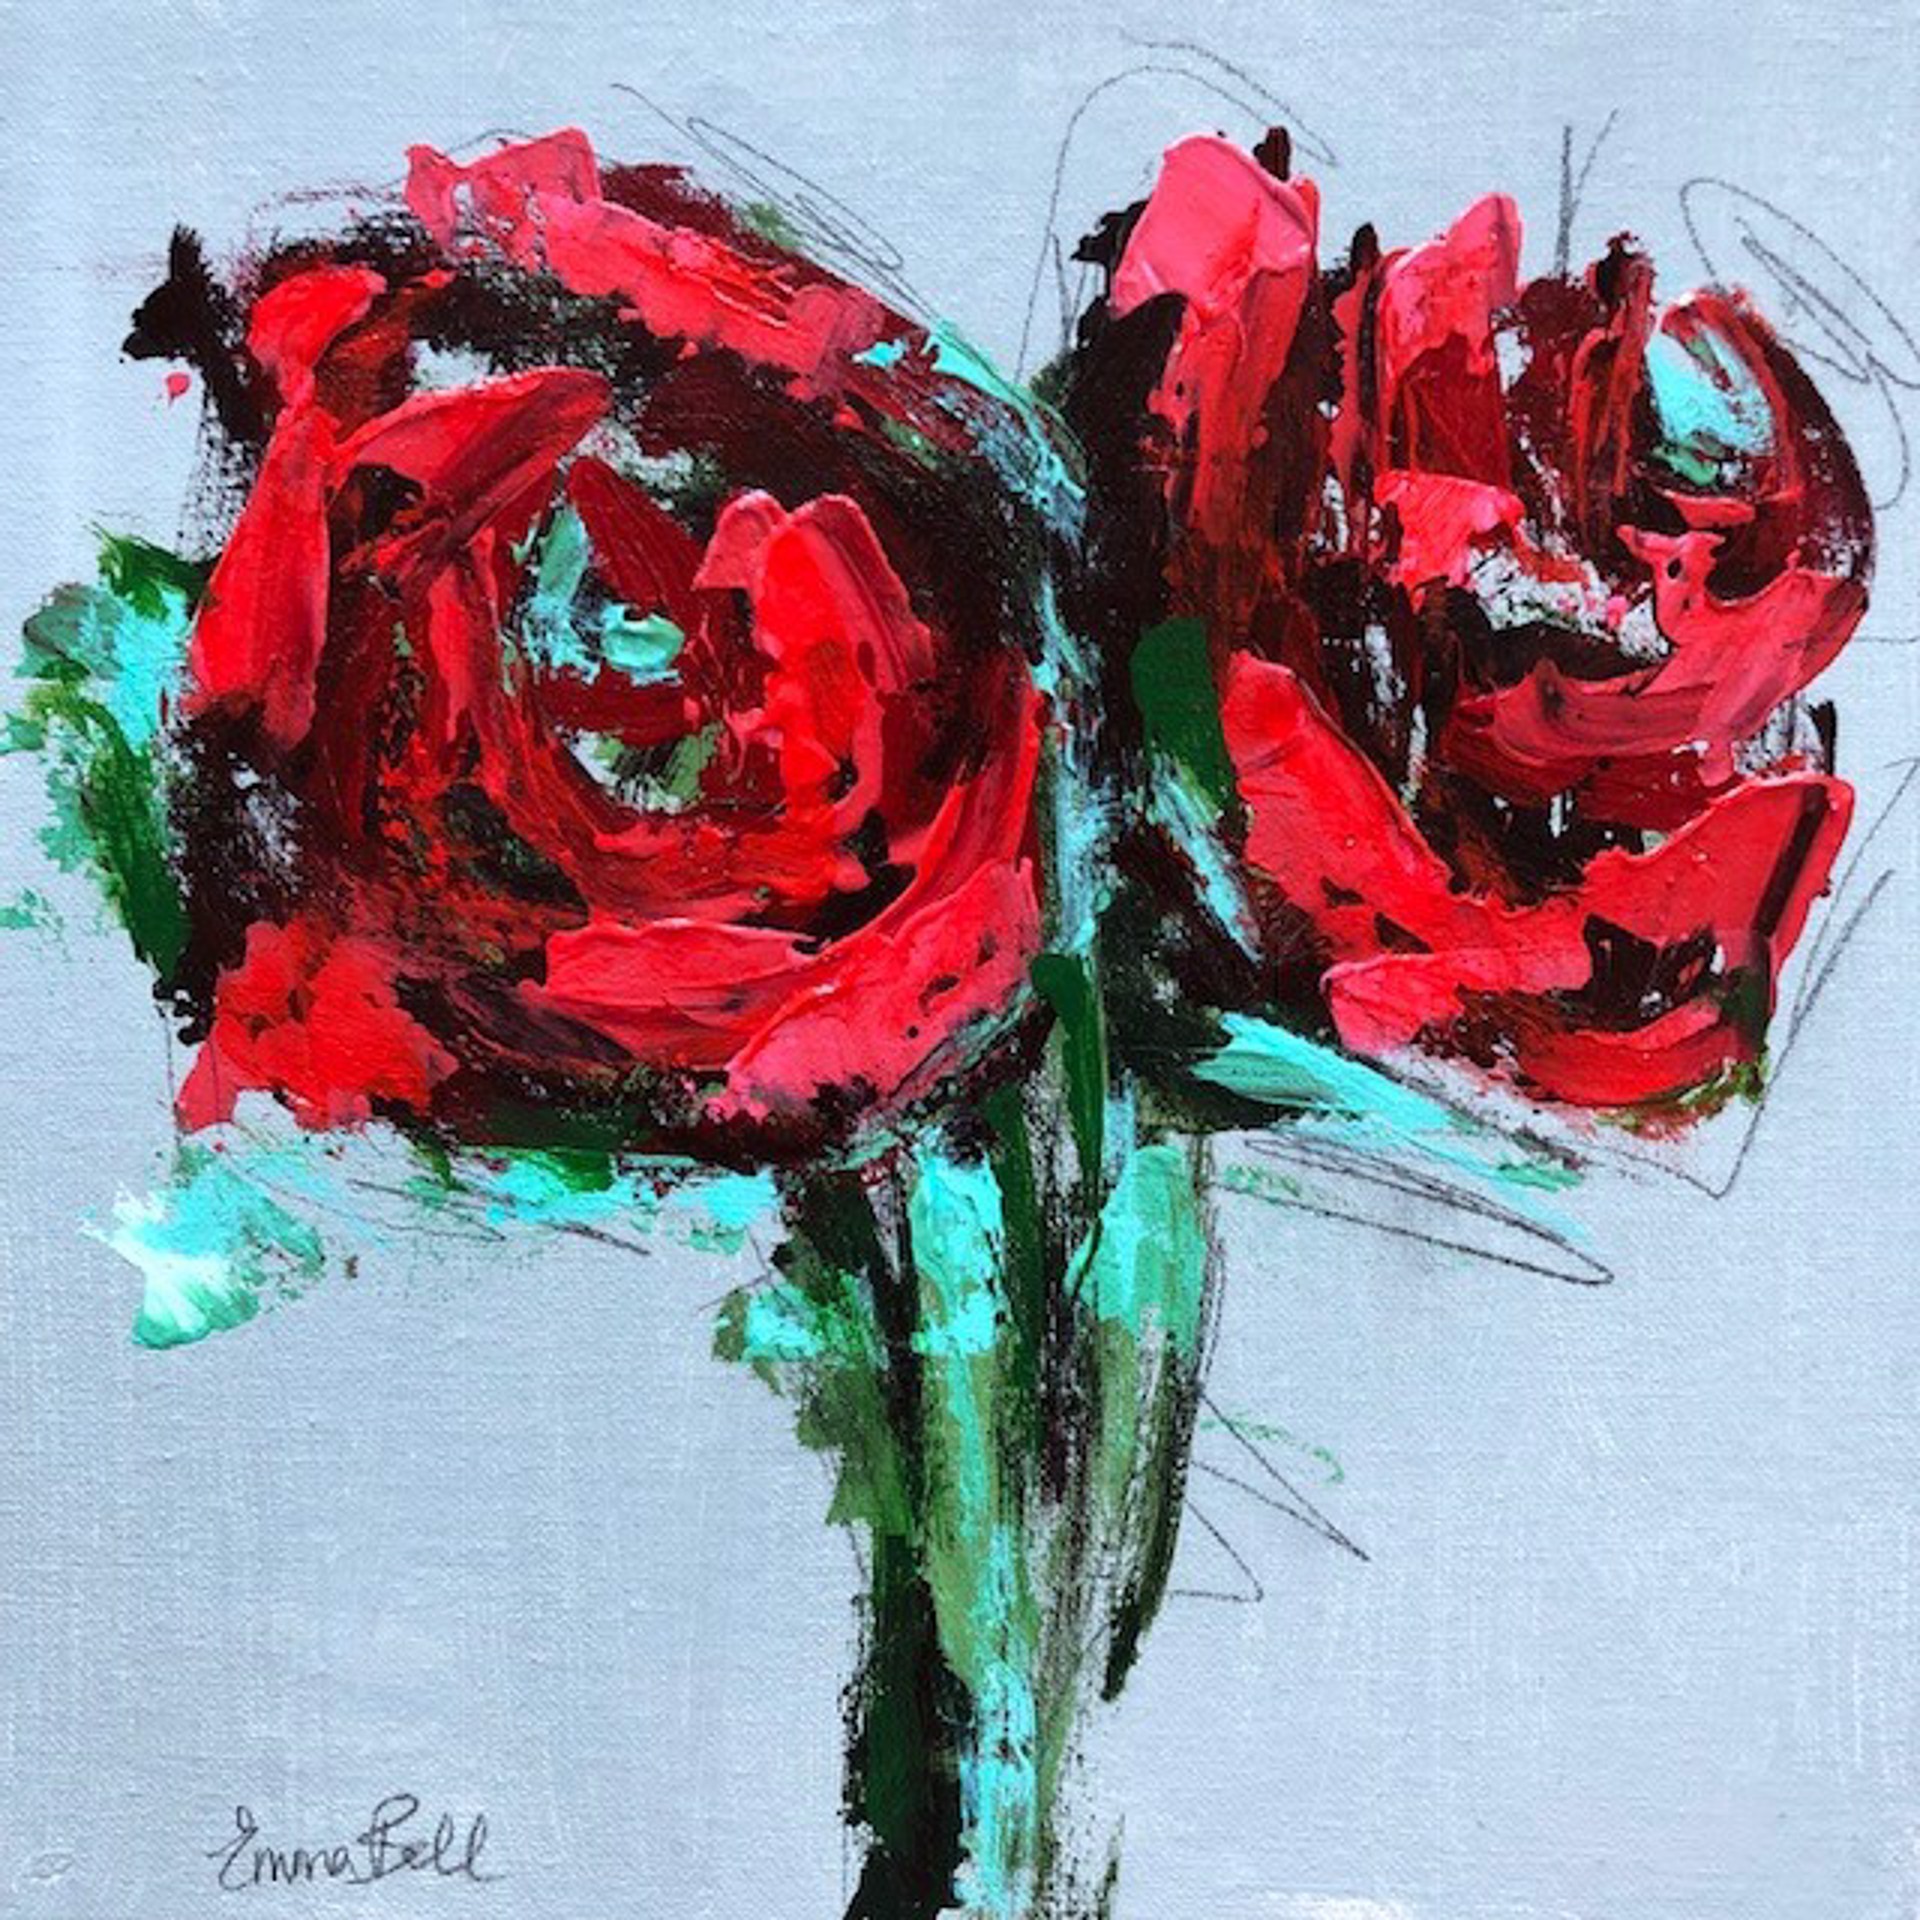 Valentine Roses #11 by Emma Bell